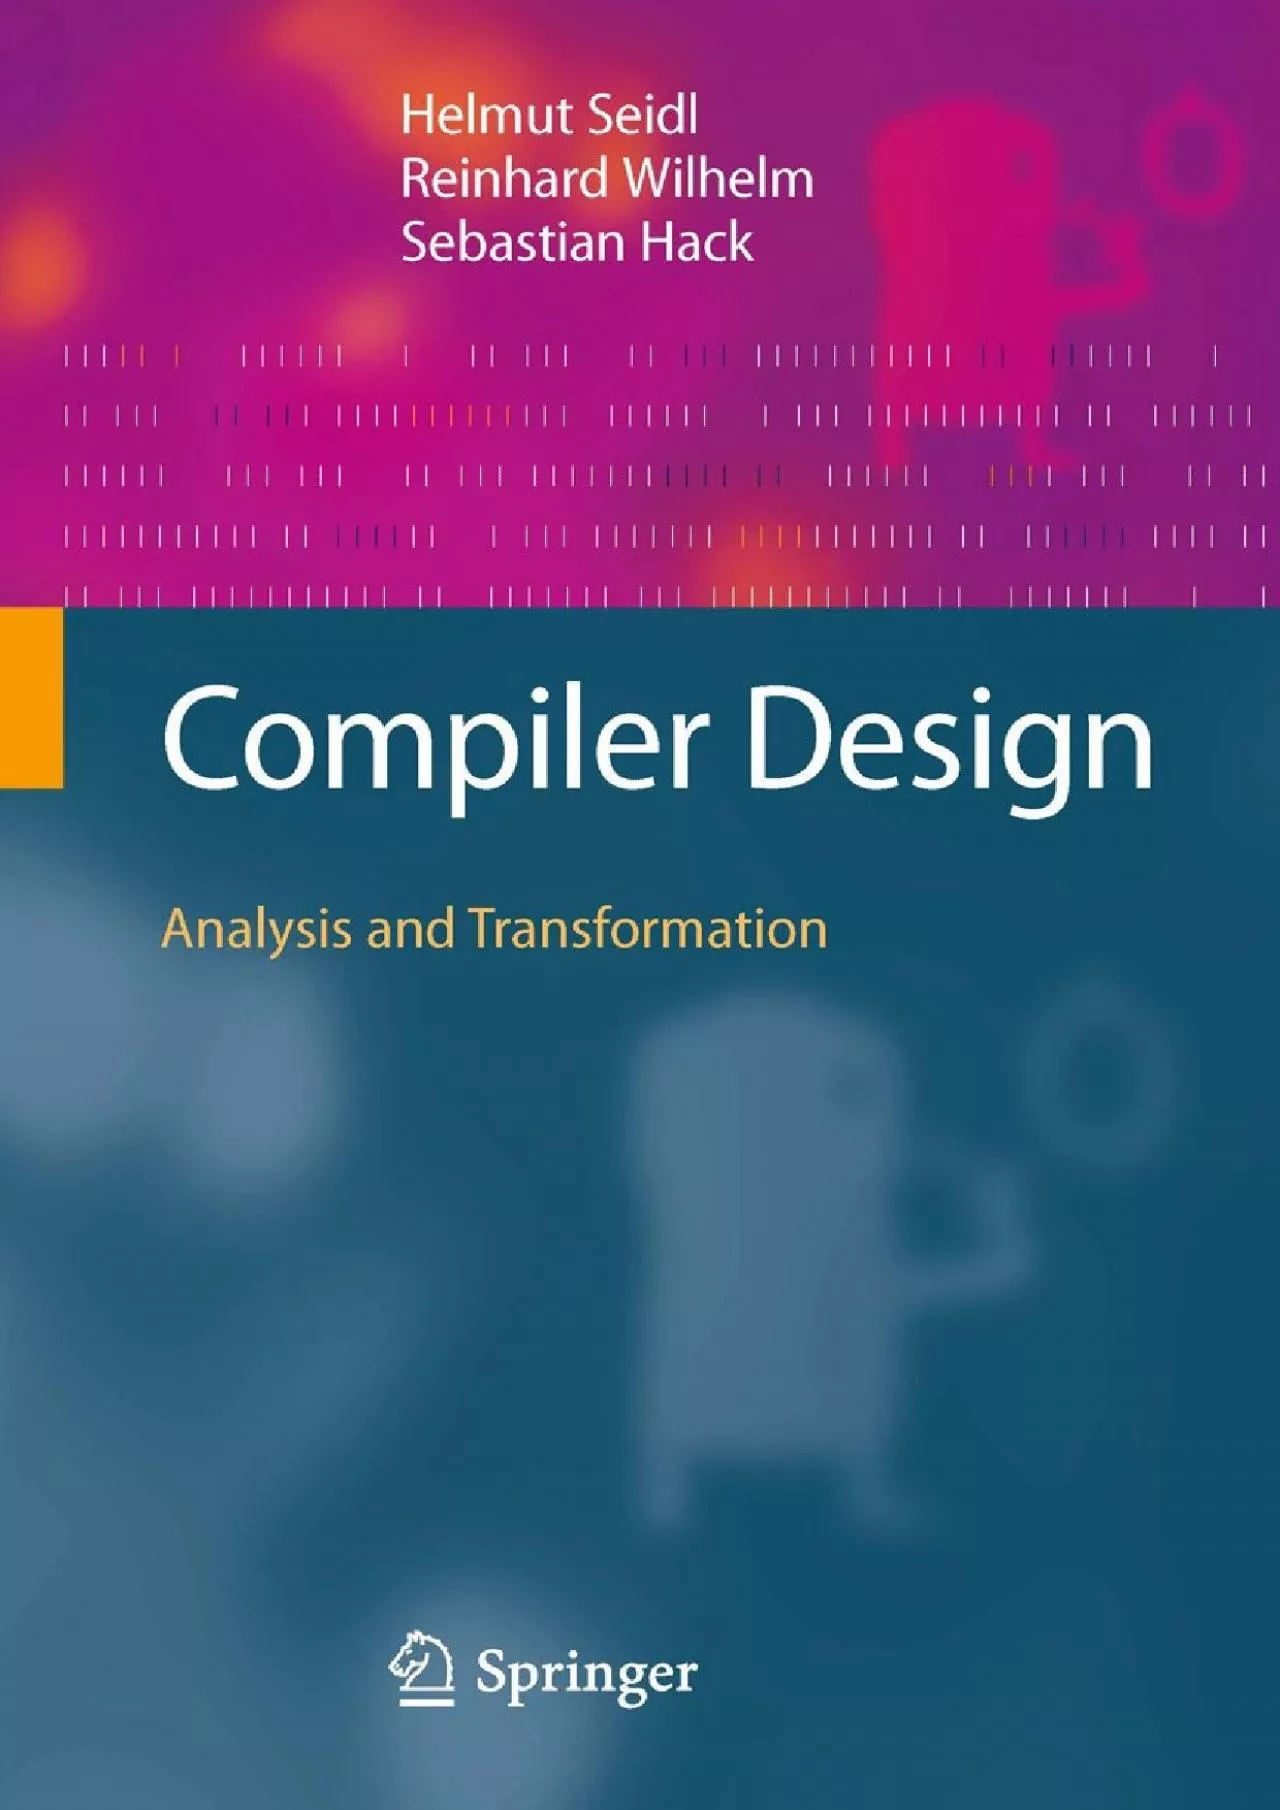 [READING BOOK]-Compiler Design: Analysis and Transformation